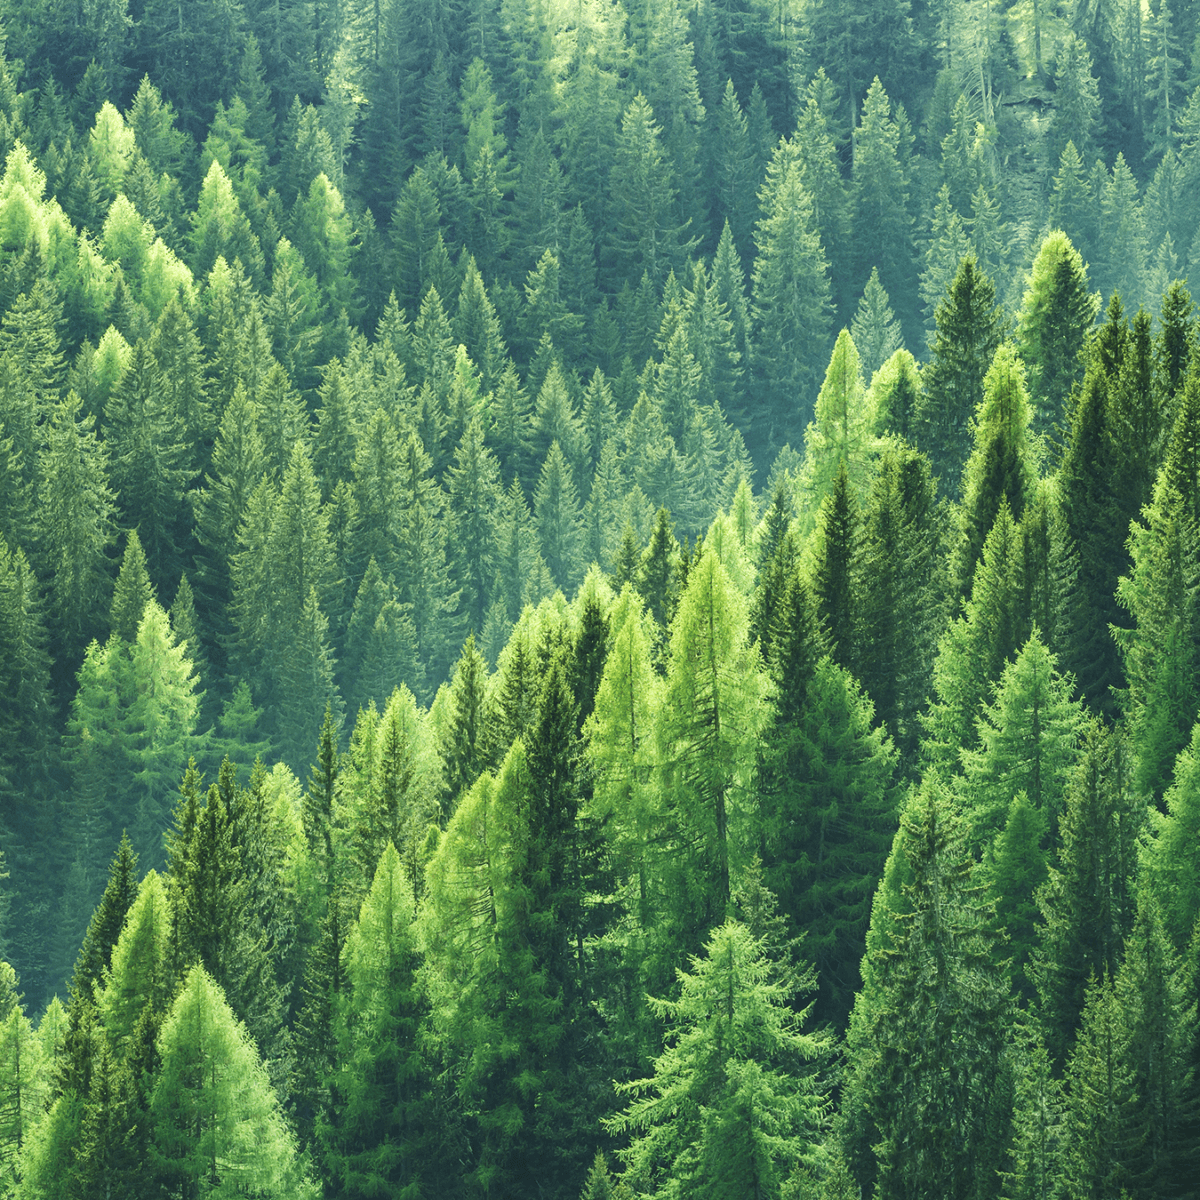 A photograph of green pine trees in a forest.